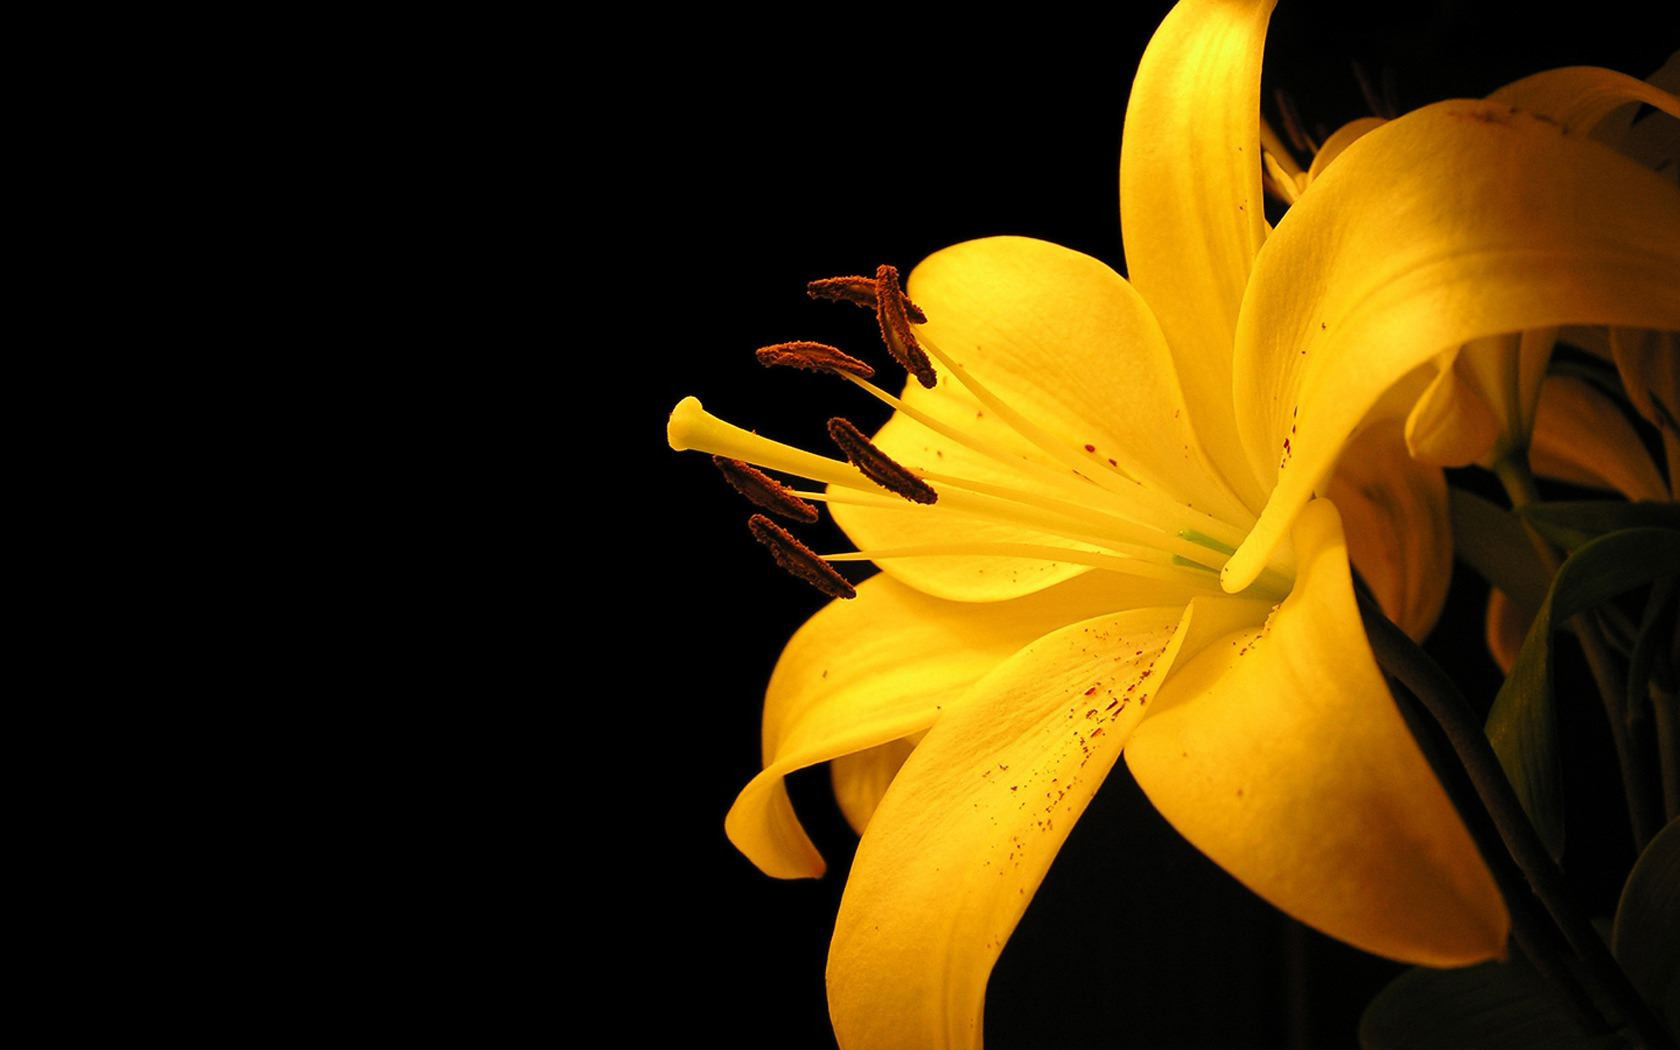 Black And Yellow Meaning 9 Desktop Wallpaper ...